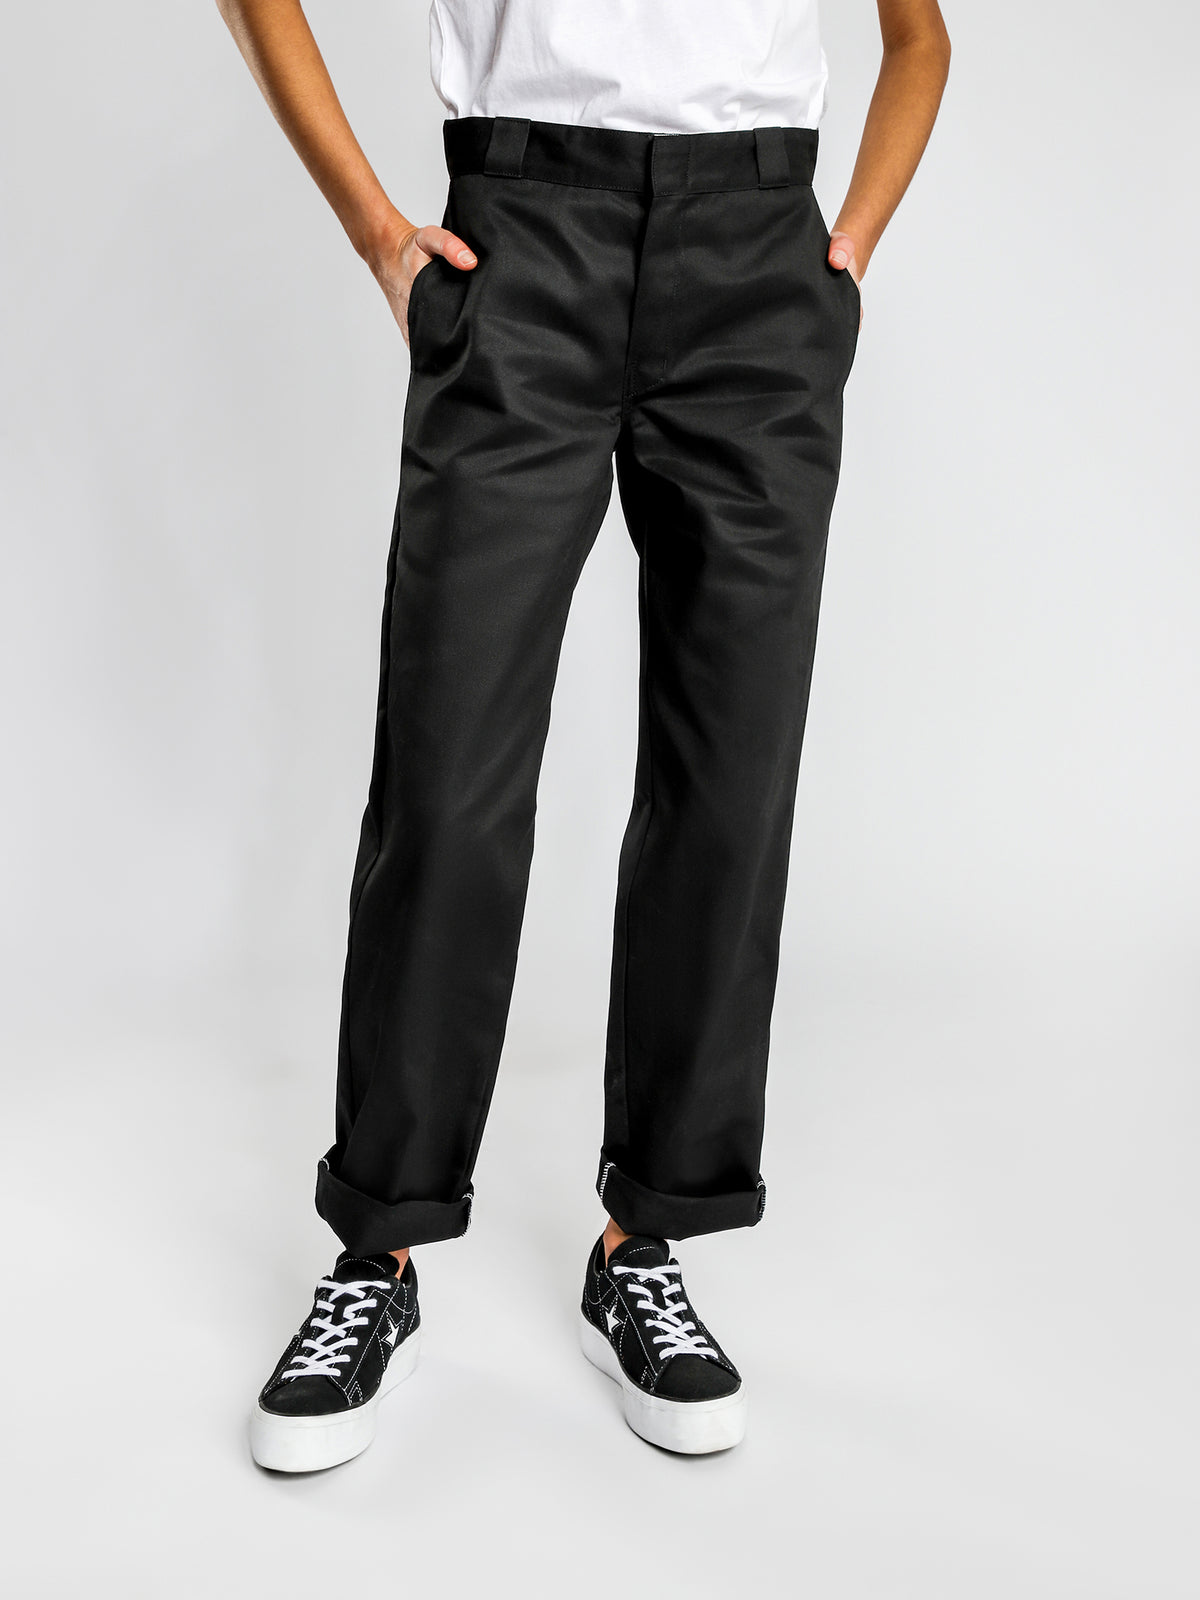 High Tapered Fit Pants in Black